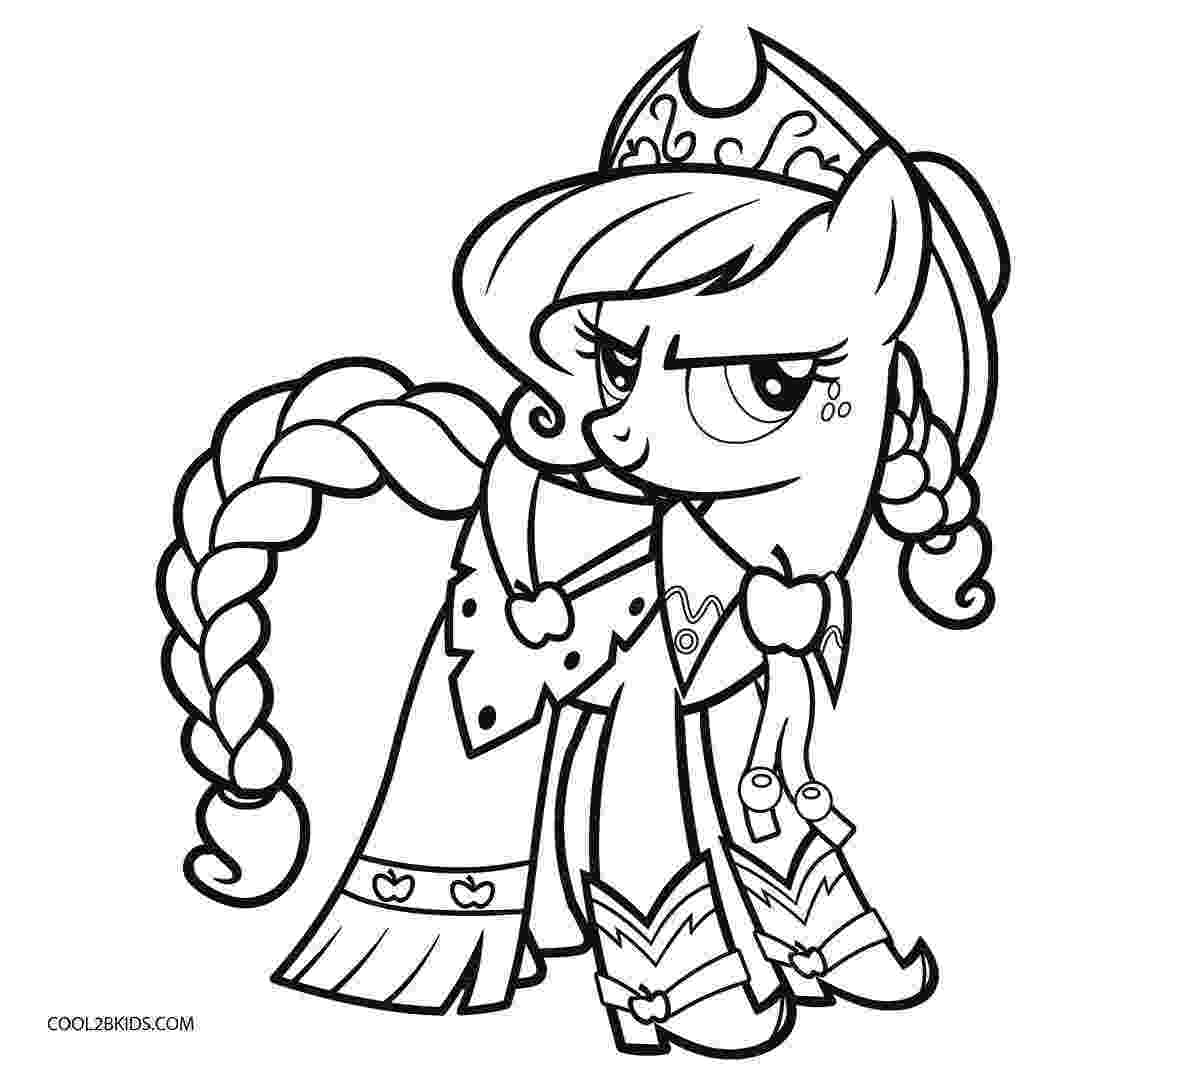 coloring book pony free printable my little pony coloring pages for kids pony coloring book 1 1